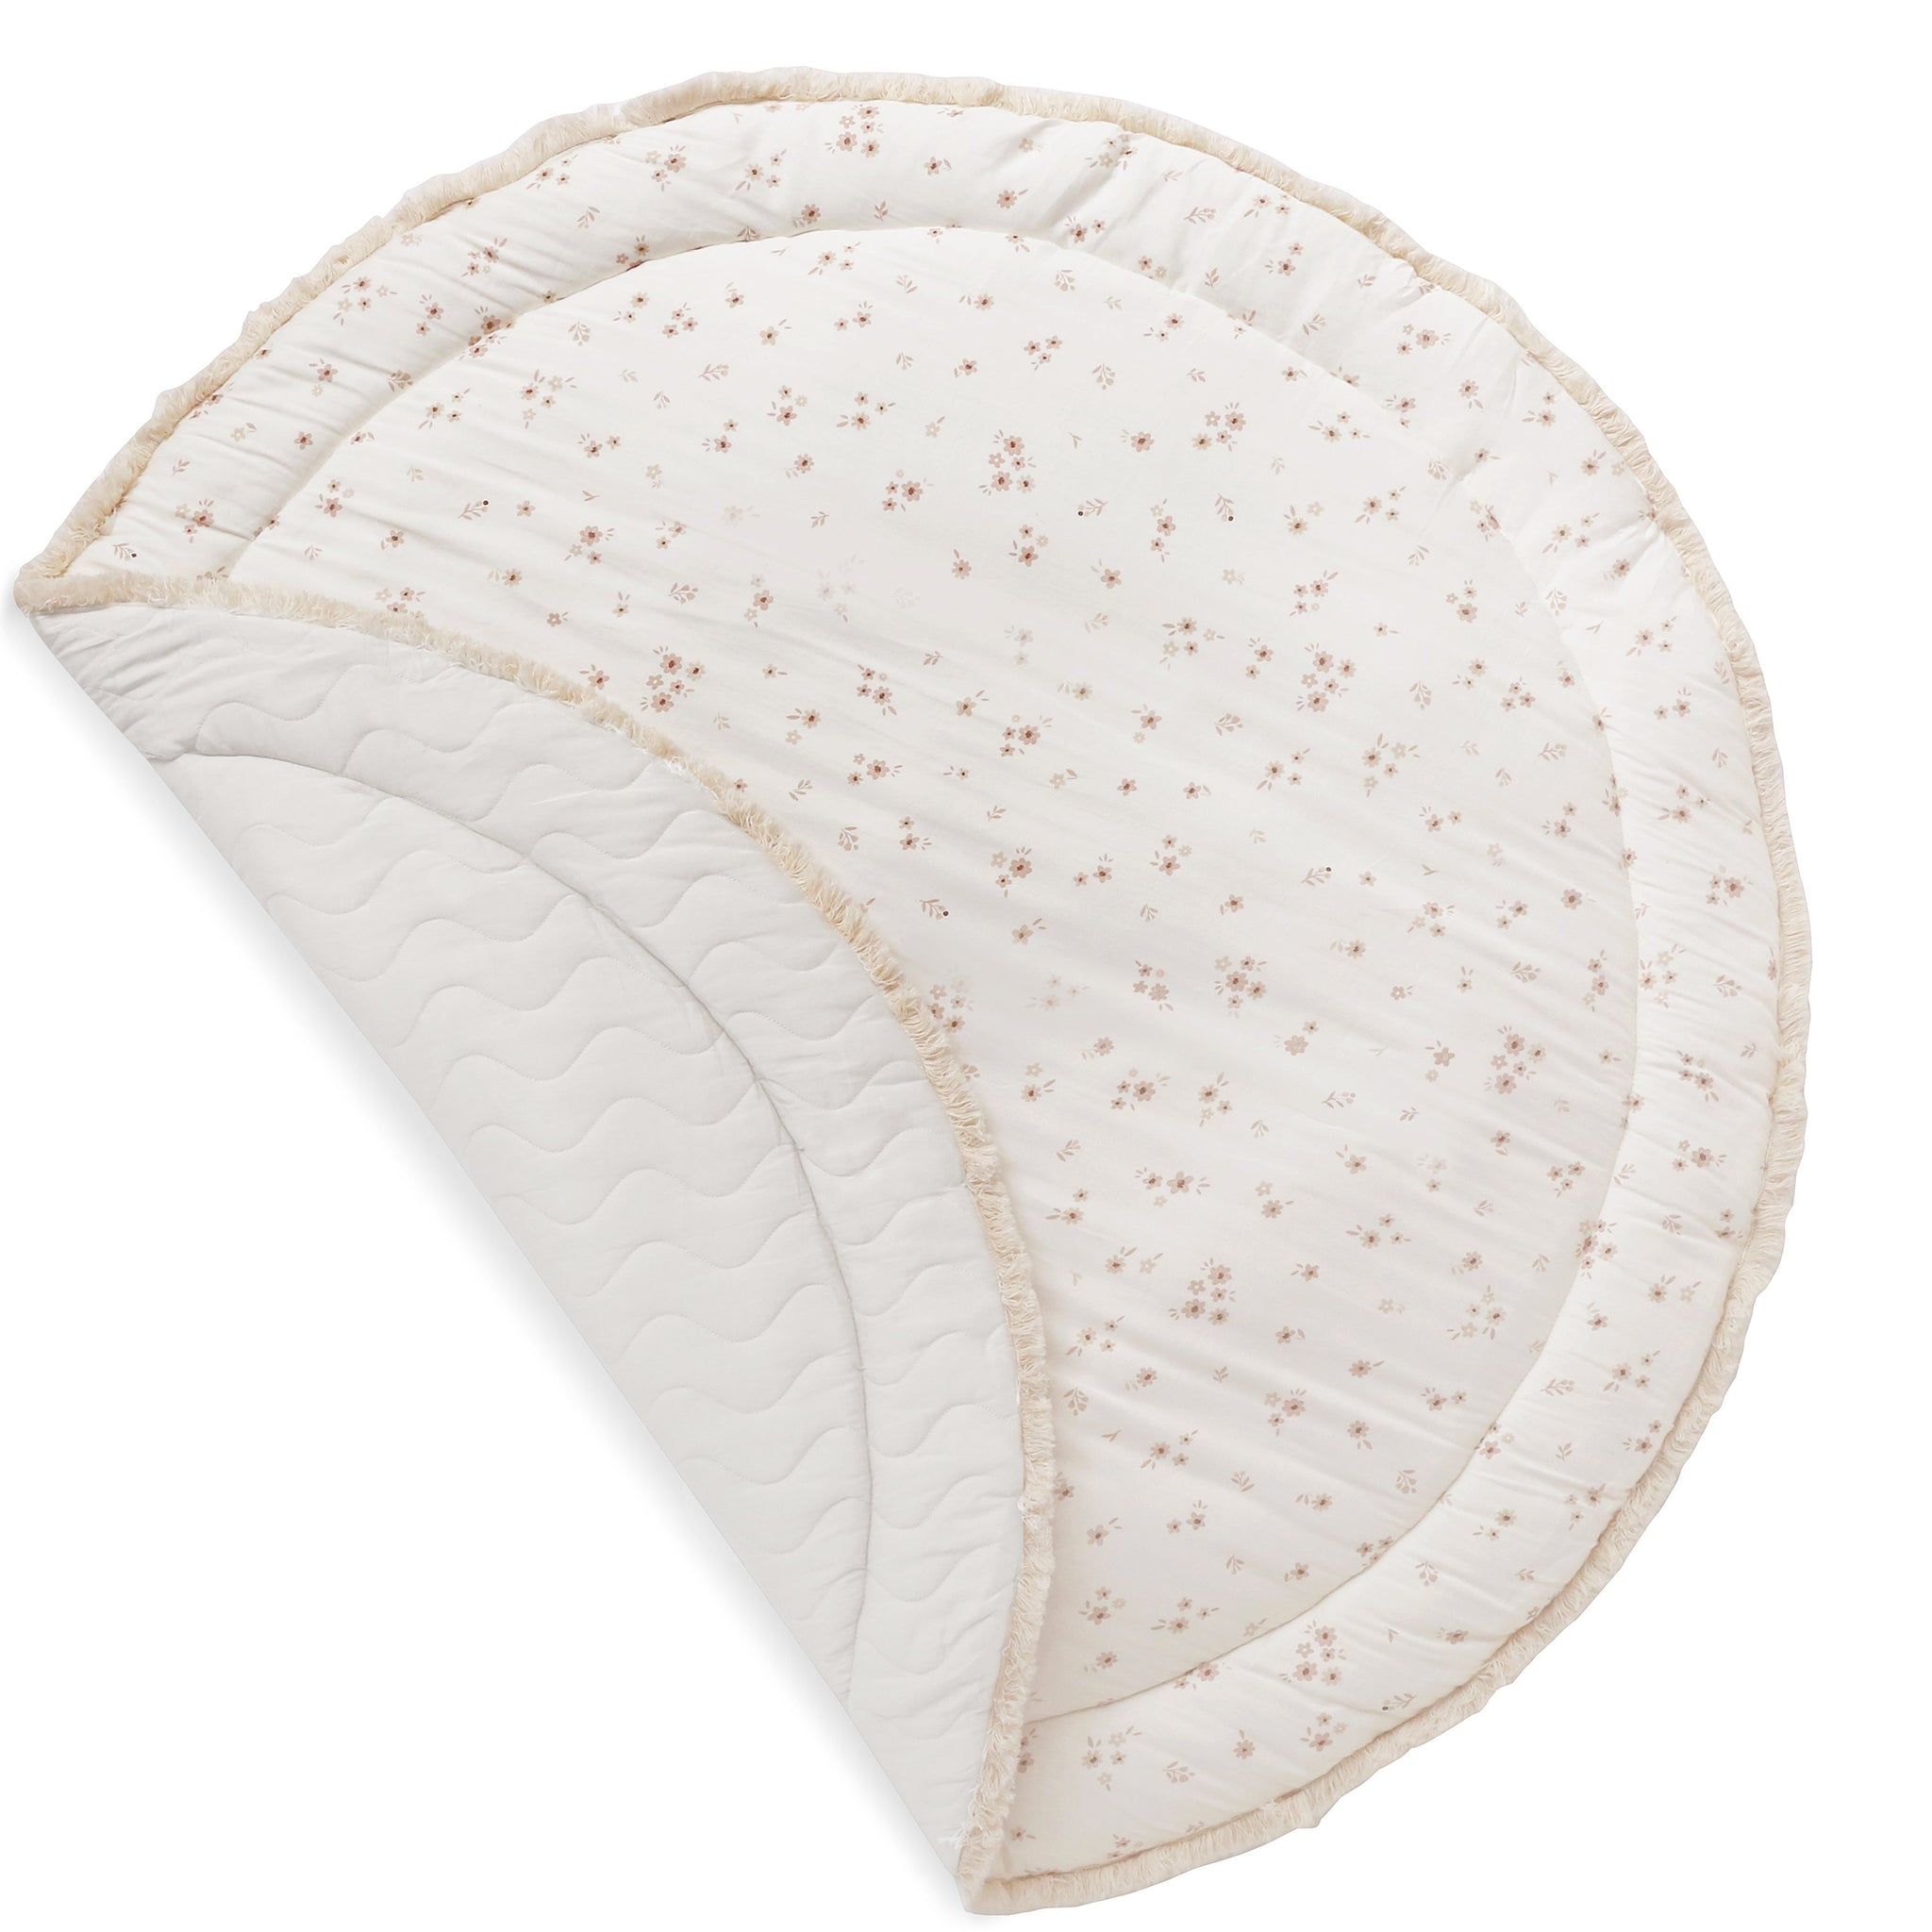 Organic Cotton Quilted Reversible Play Mat - Bloom / Ivory - Makemake Organics